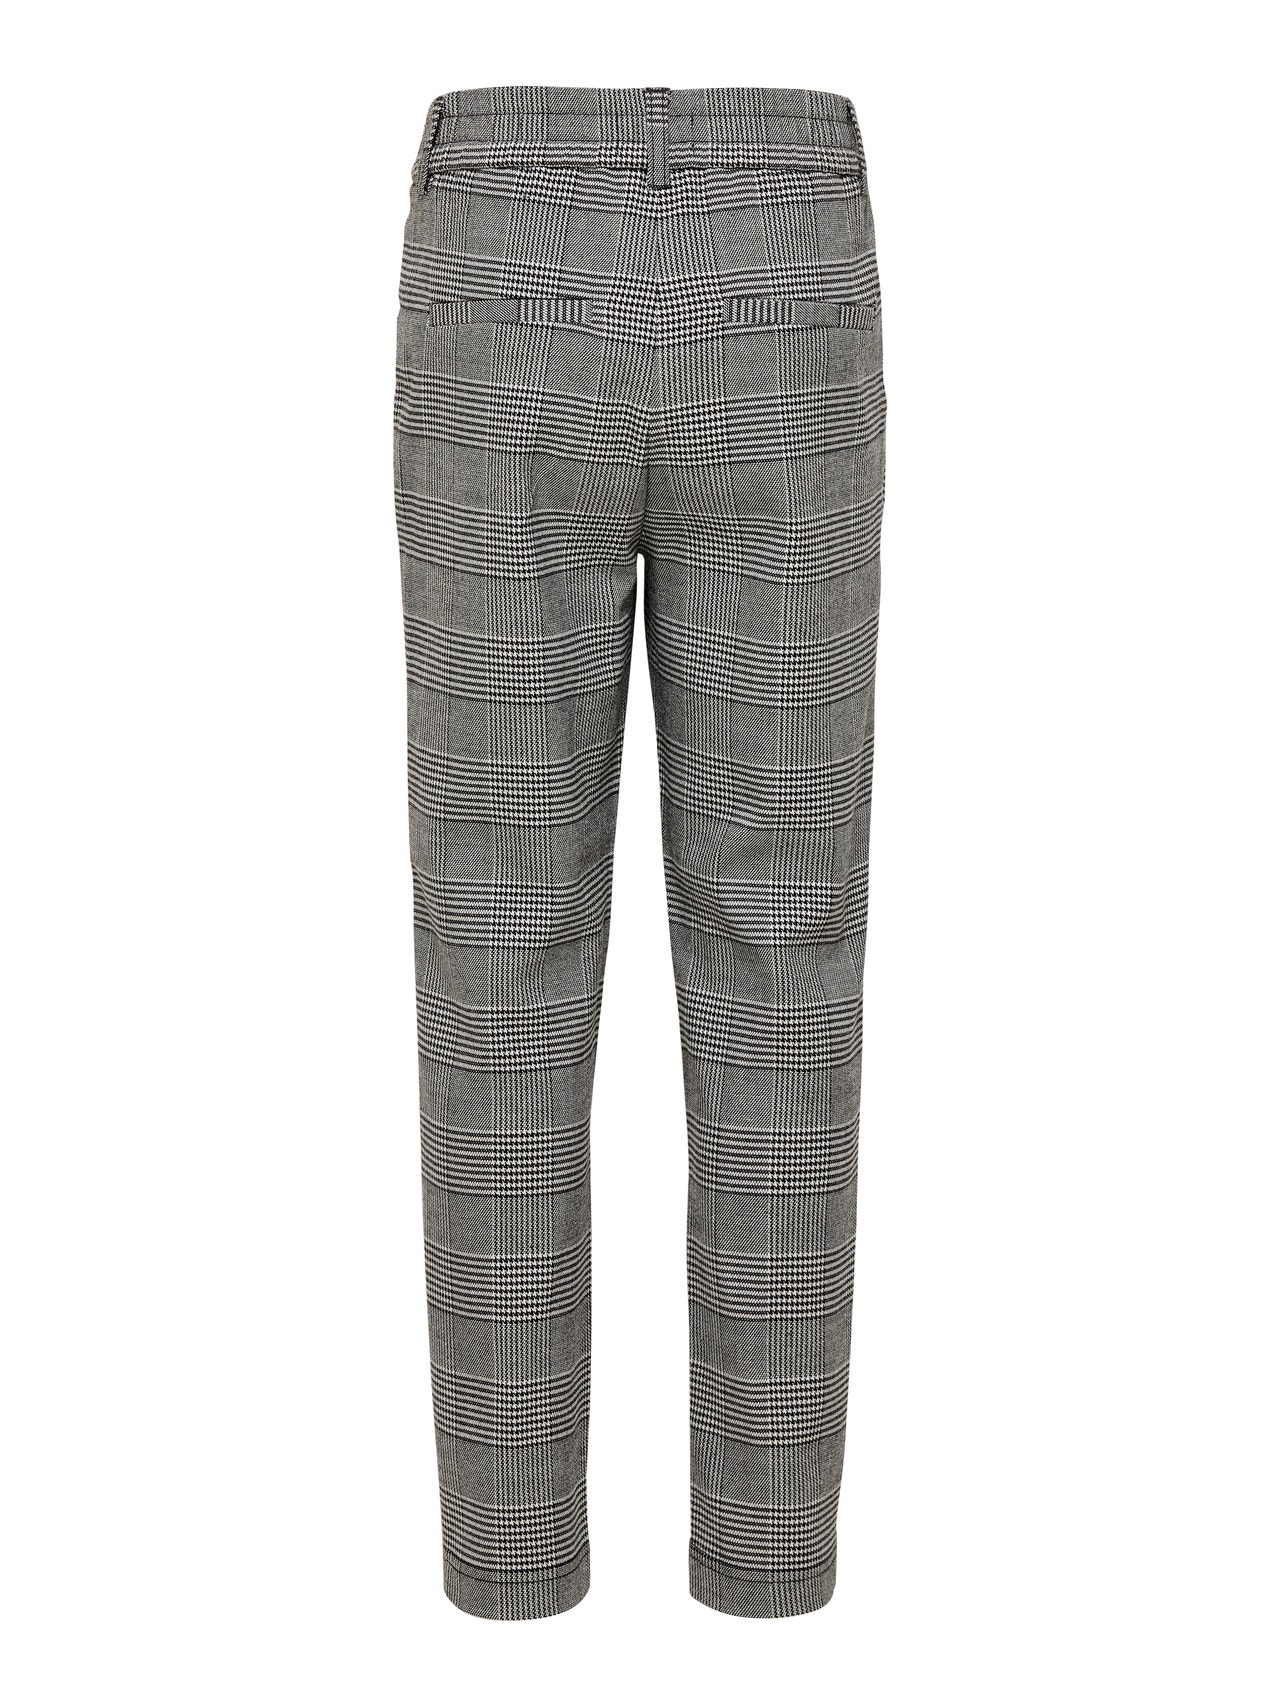 ONLY Straight Fit Trousers -Medium Grey Melange - 15183134